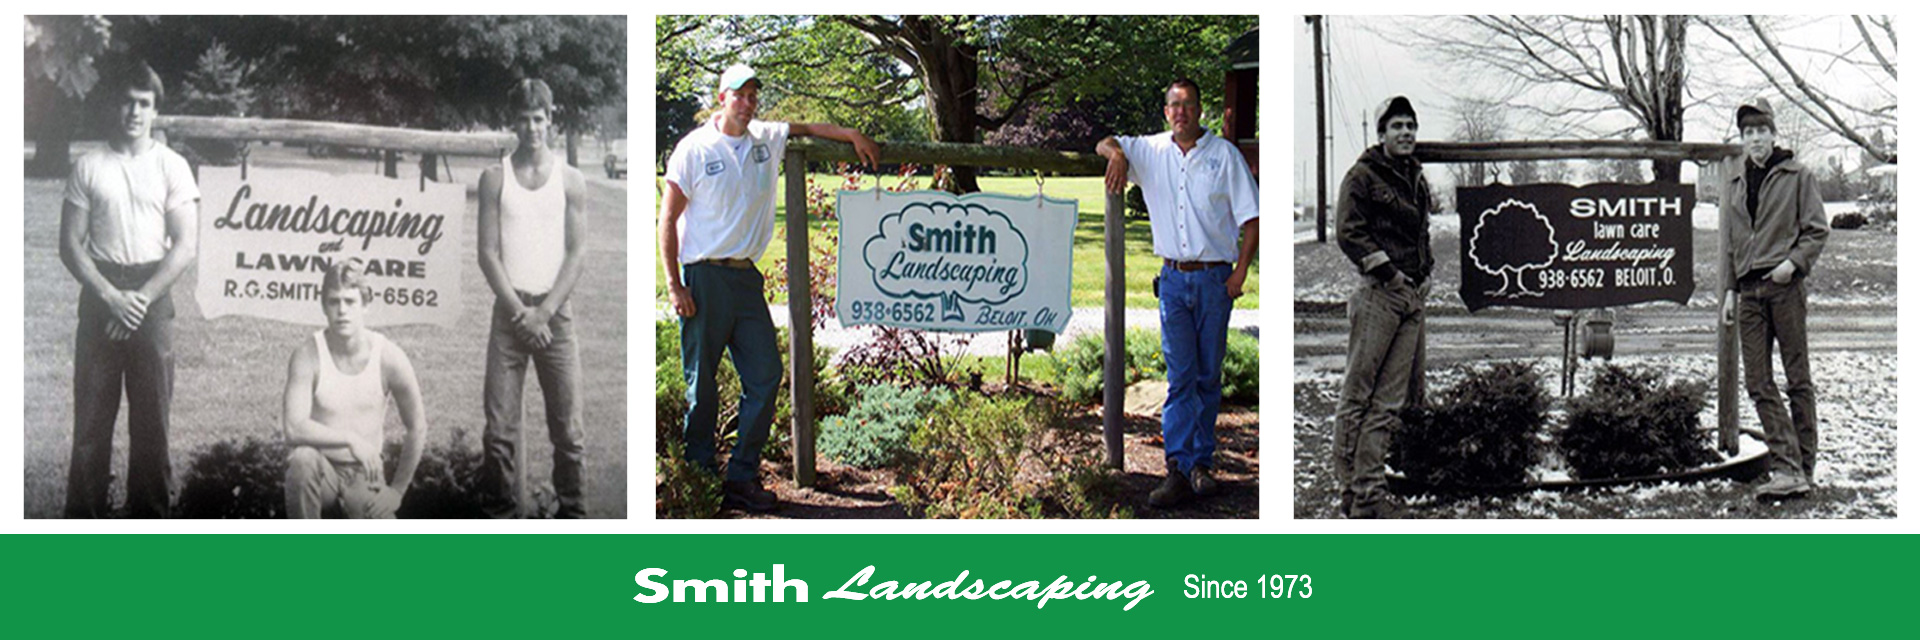 Smith Landscaping Jobs in Stark County